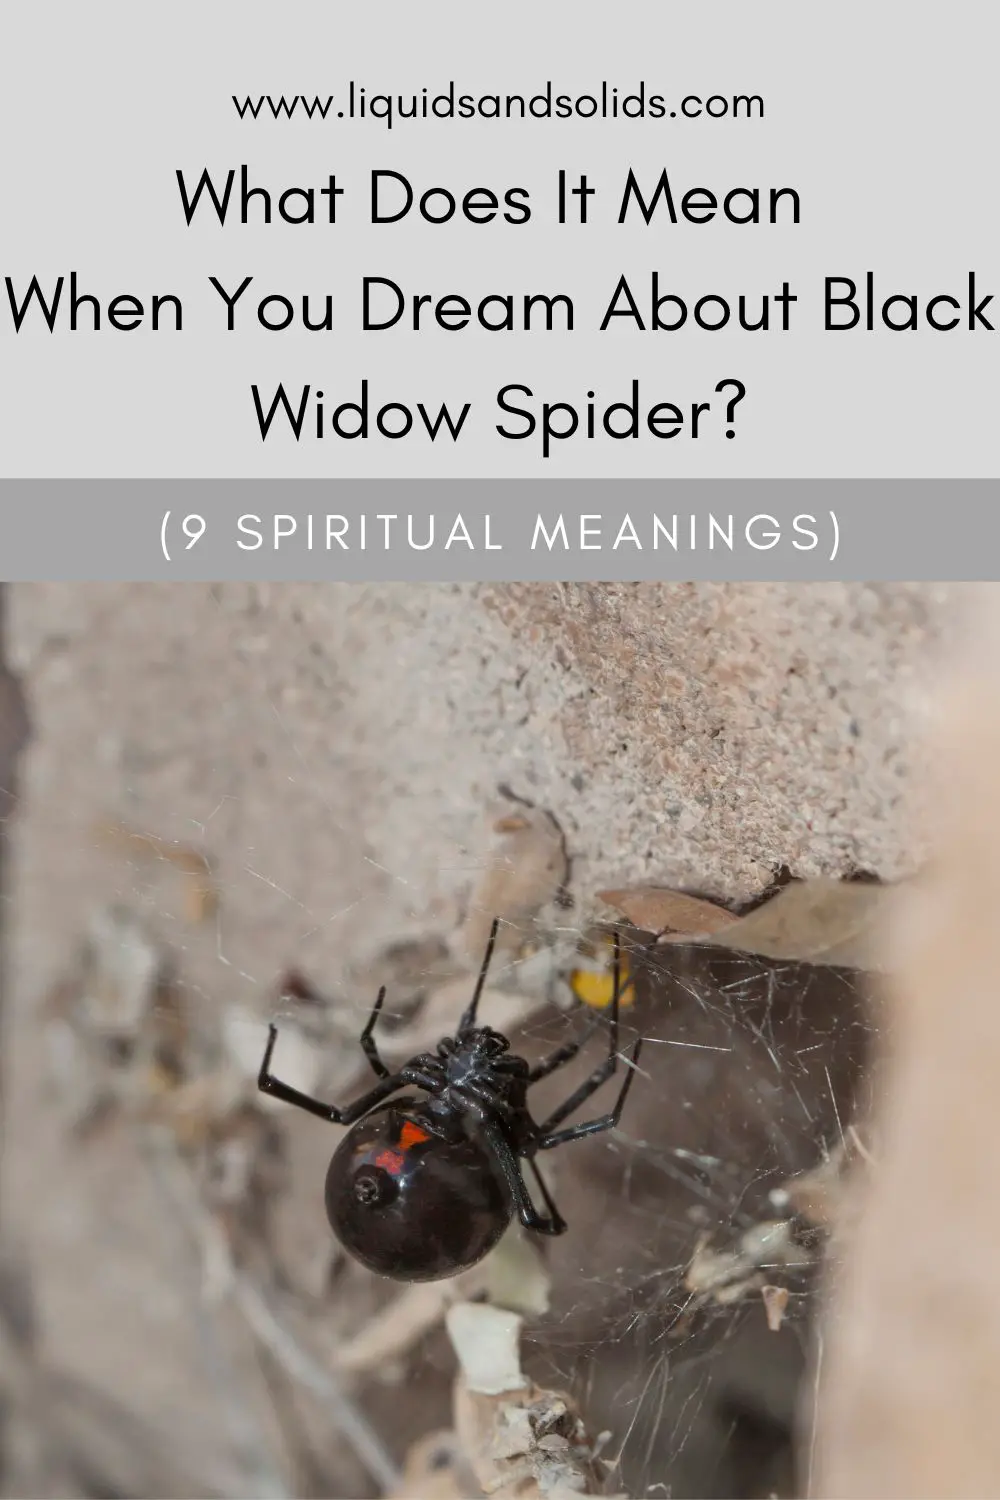 What Does It Mean To Dream Of A Black Widow?